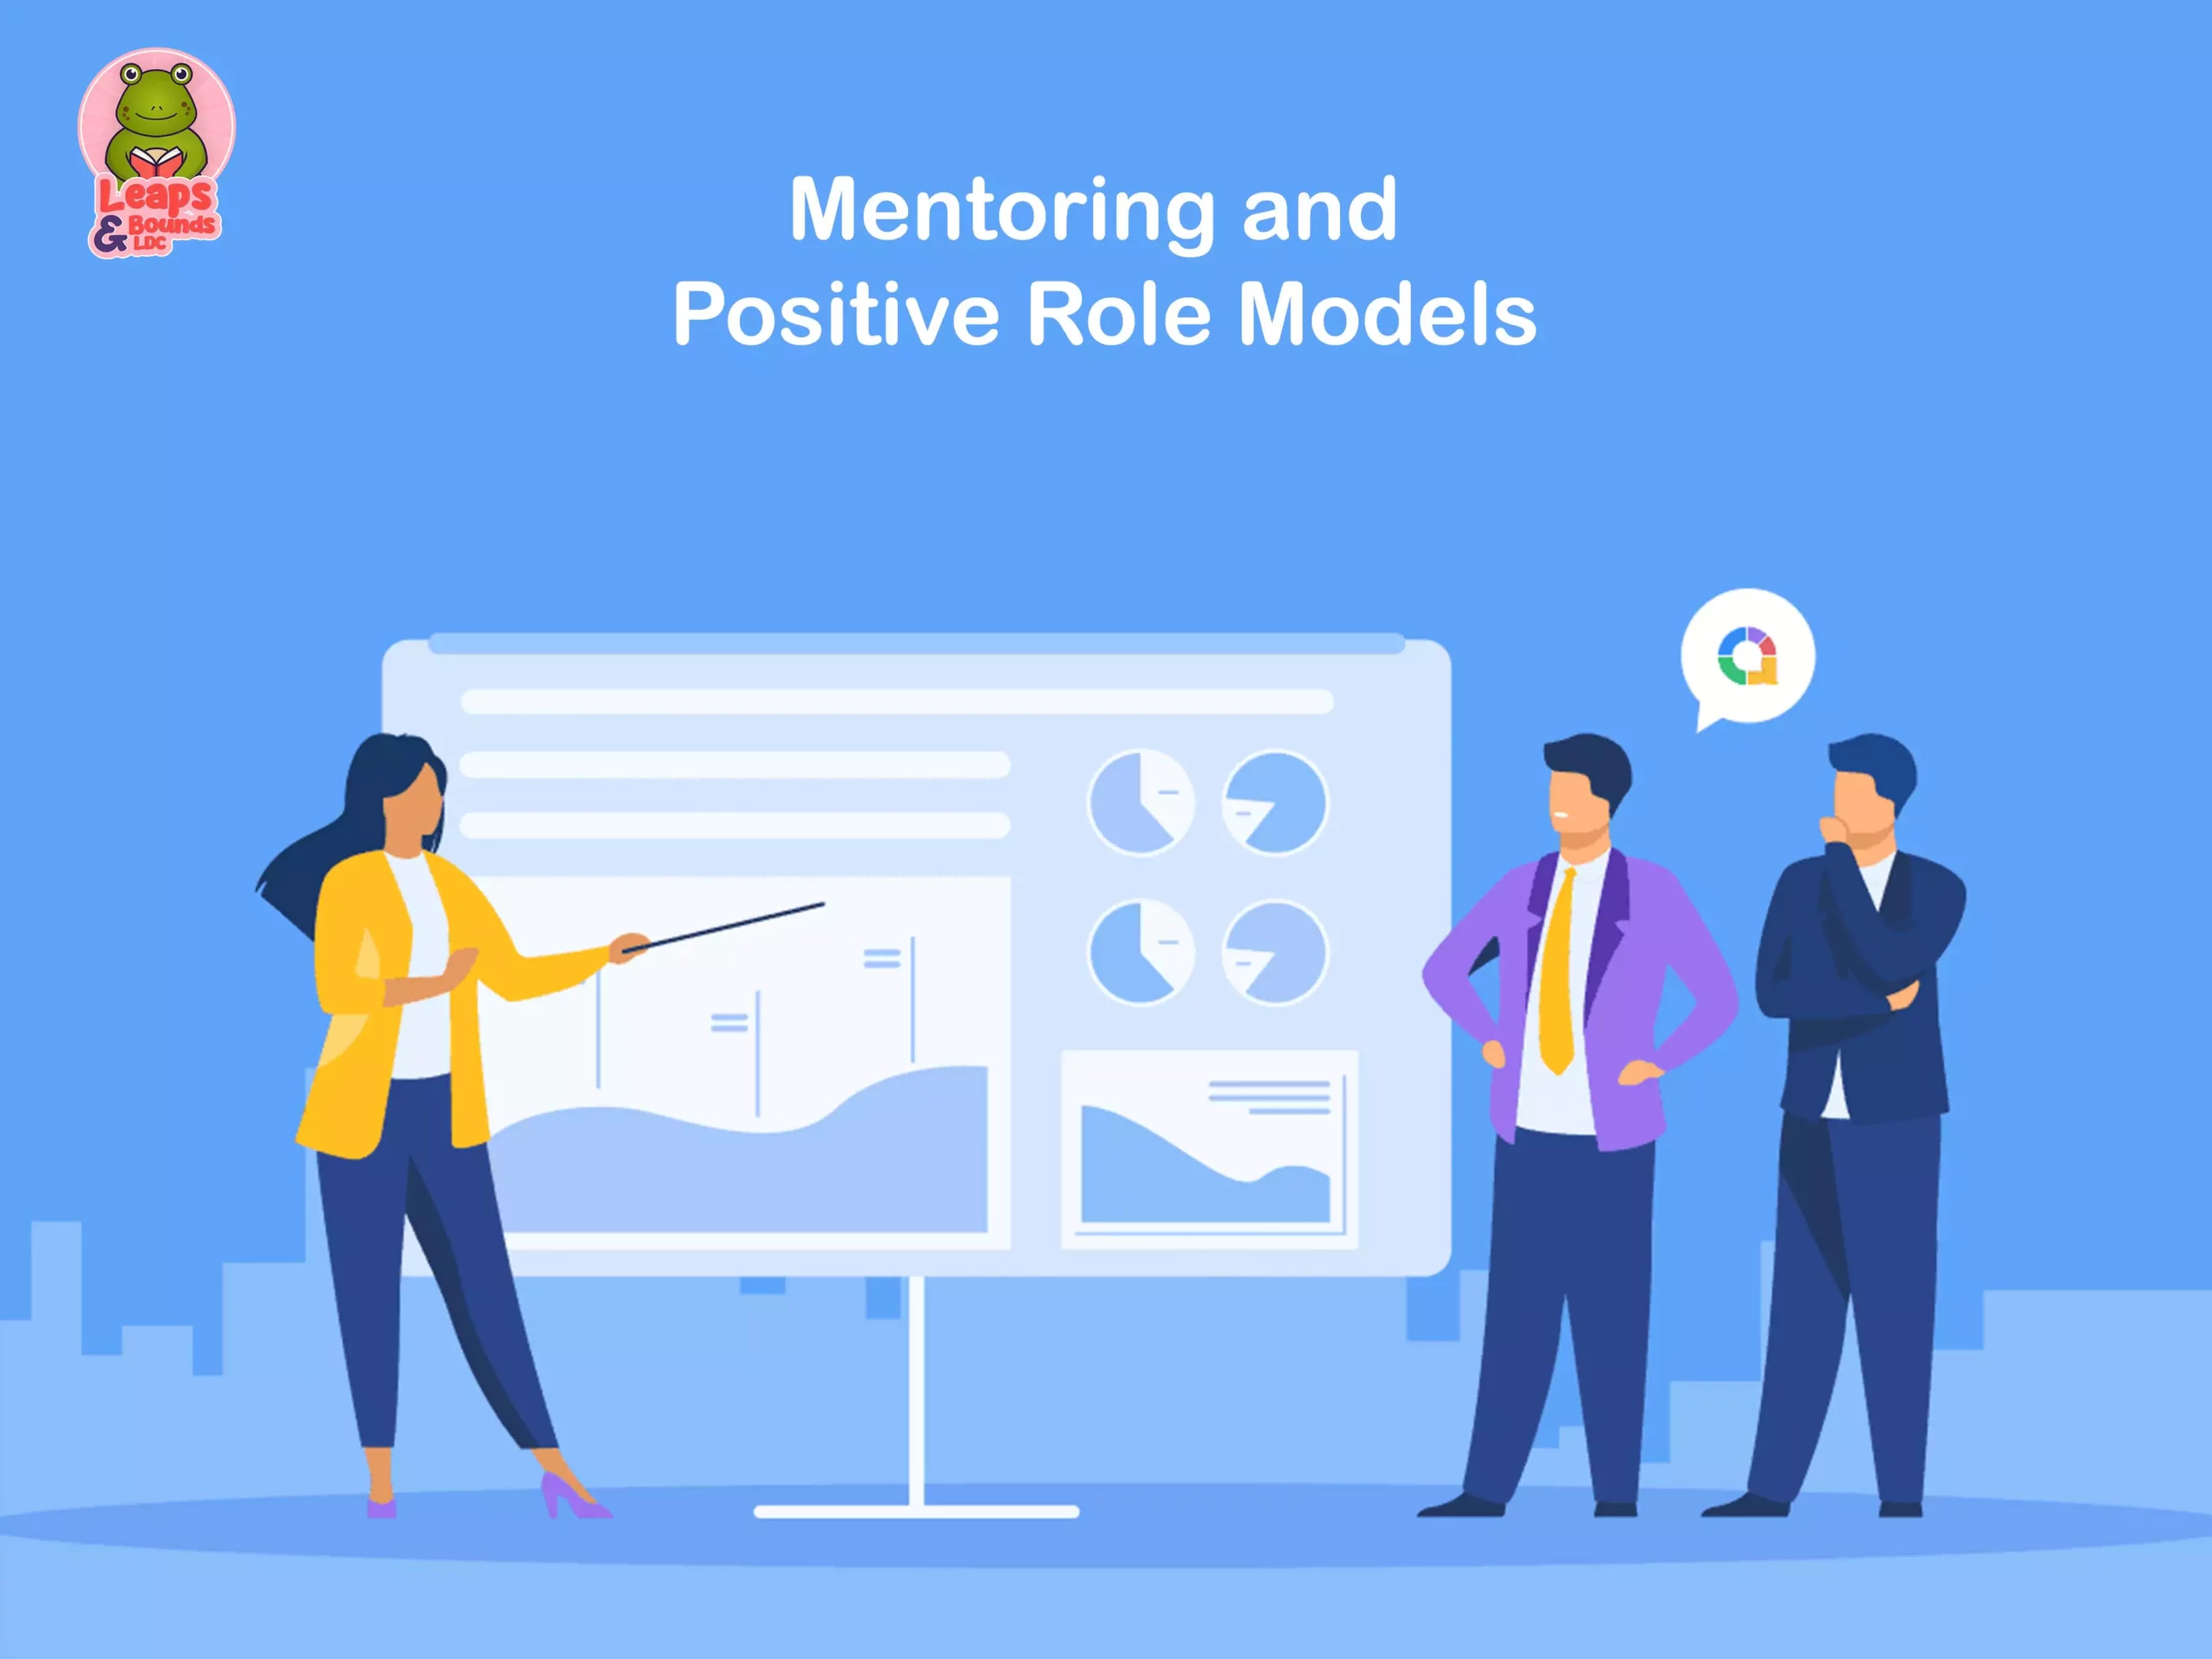 Mentoring and Positive Role Models